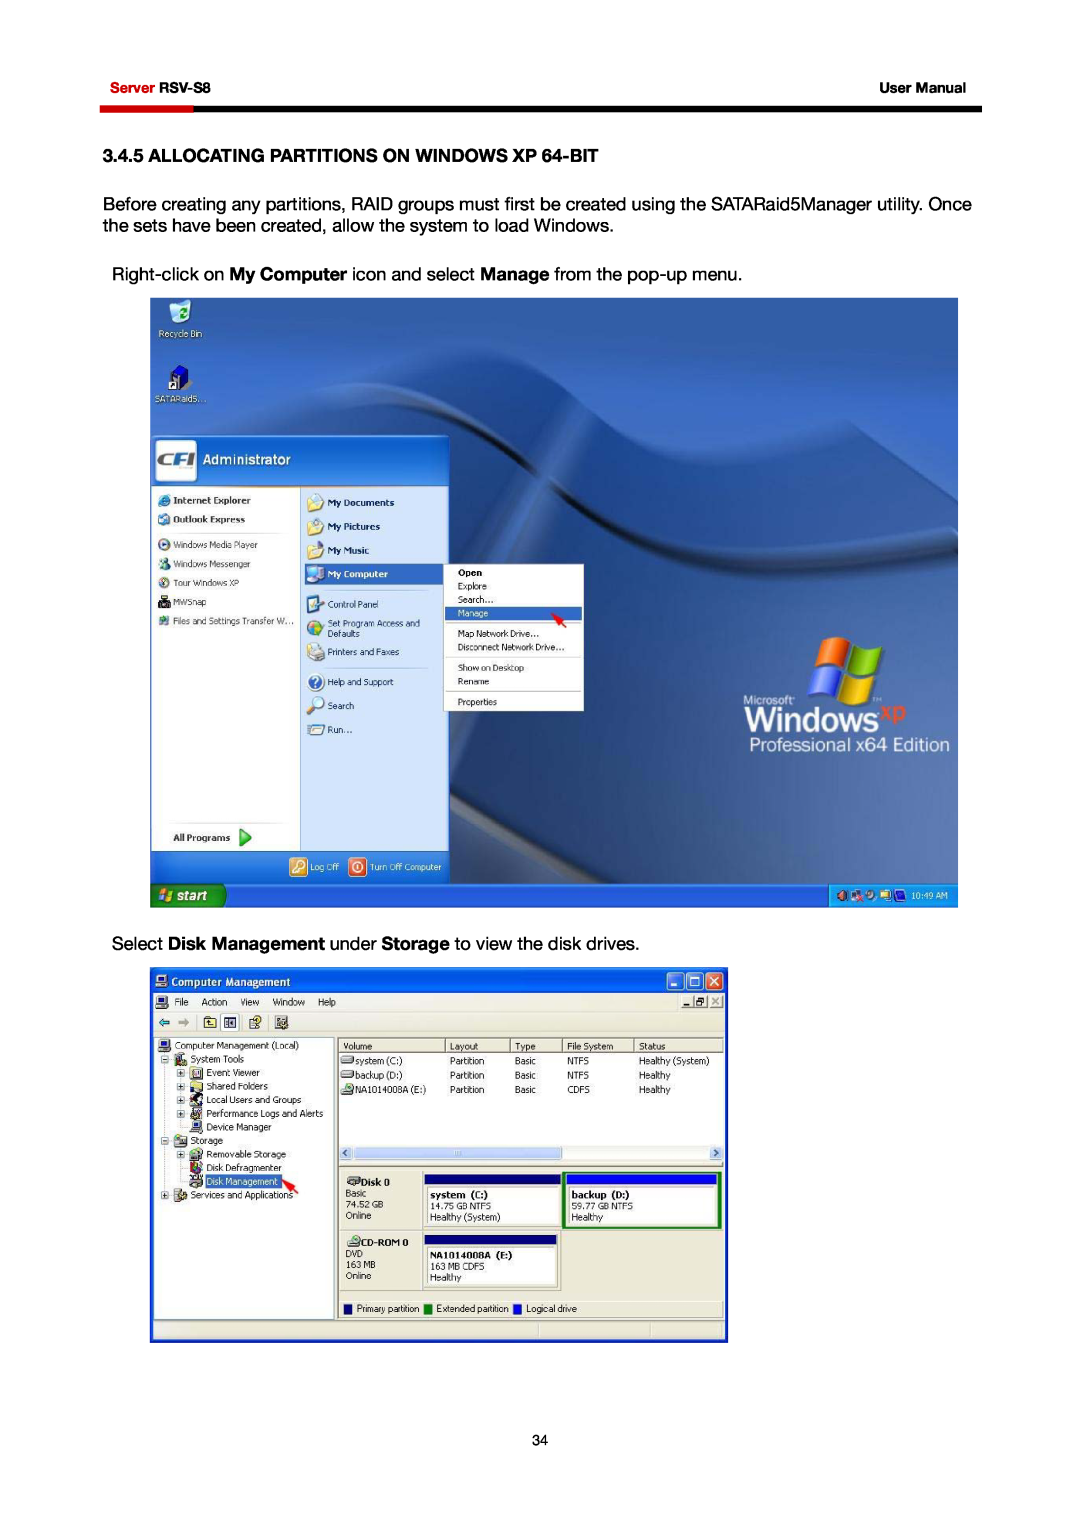 Rosewill RSV-S8 ALLOCATING PARTITIONS ON WINDOWS XP 64-BIT, Select Disk Management under Storage to view the disk drives 